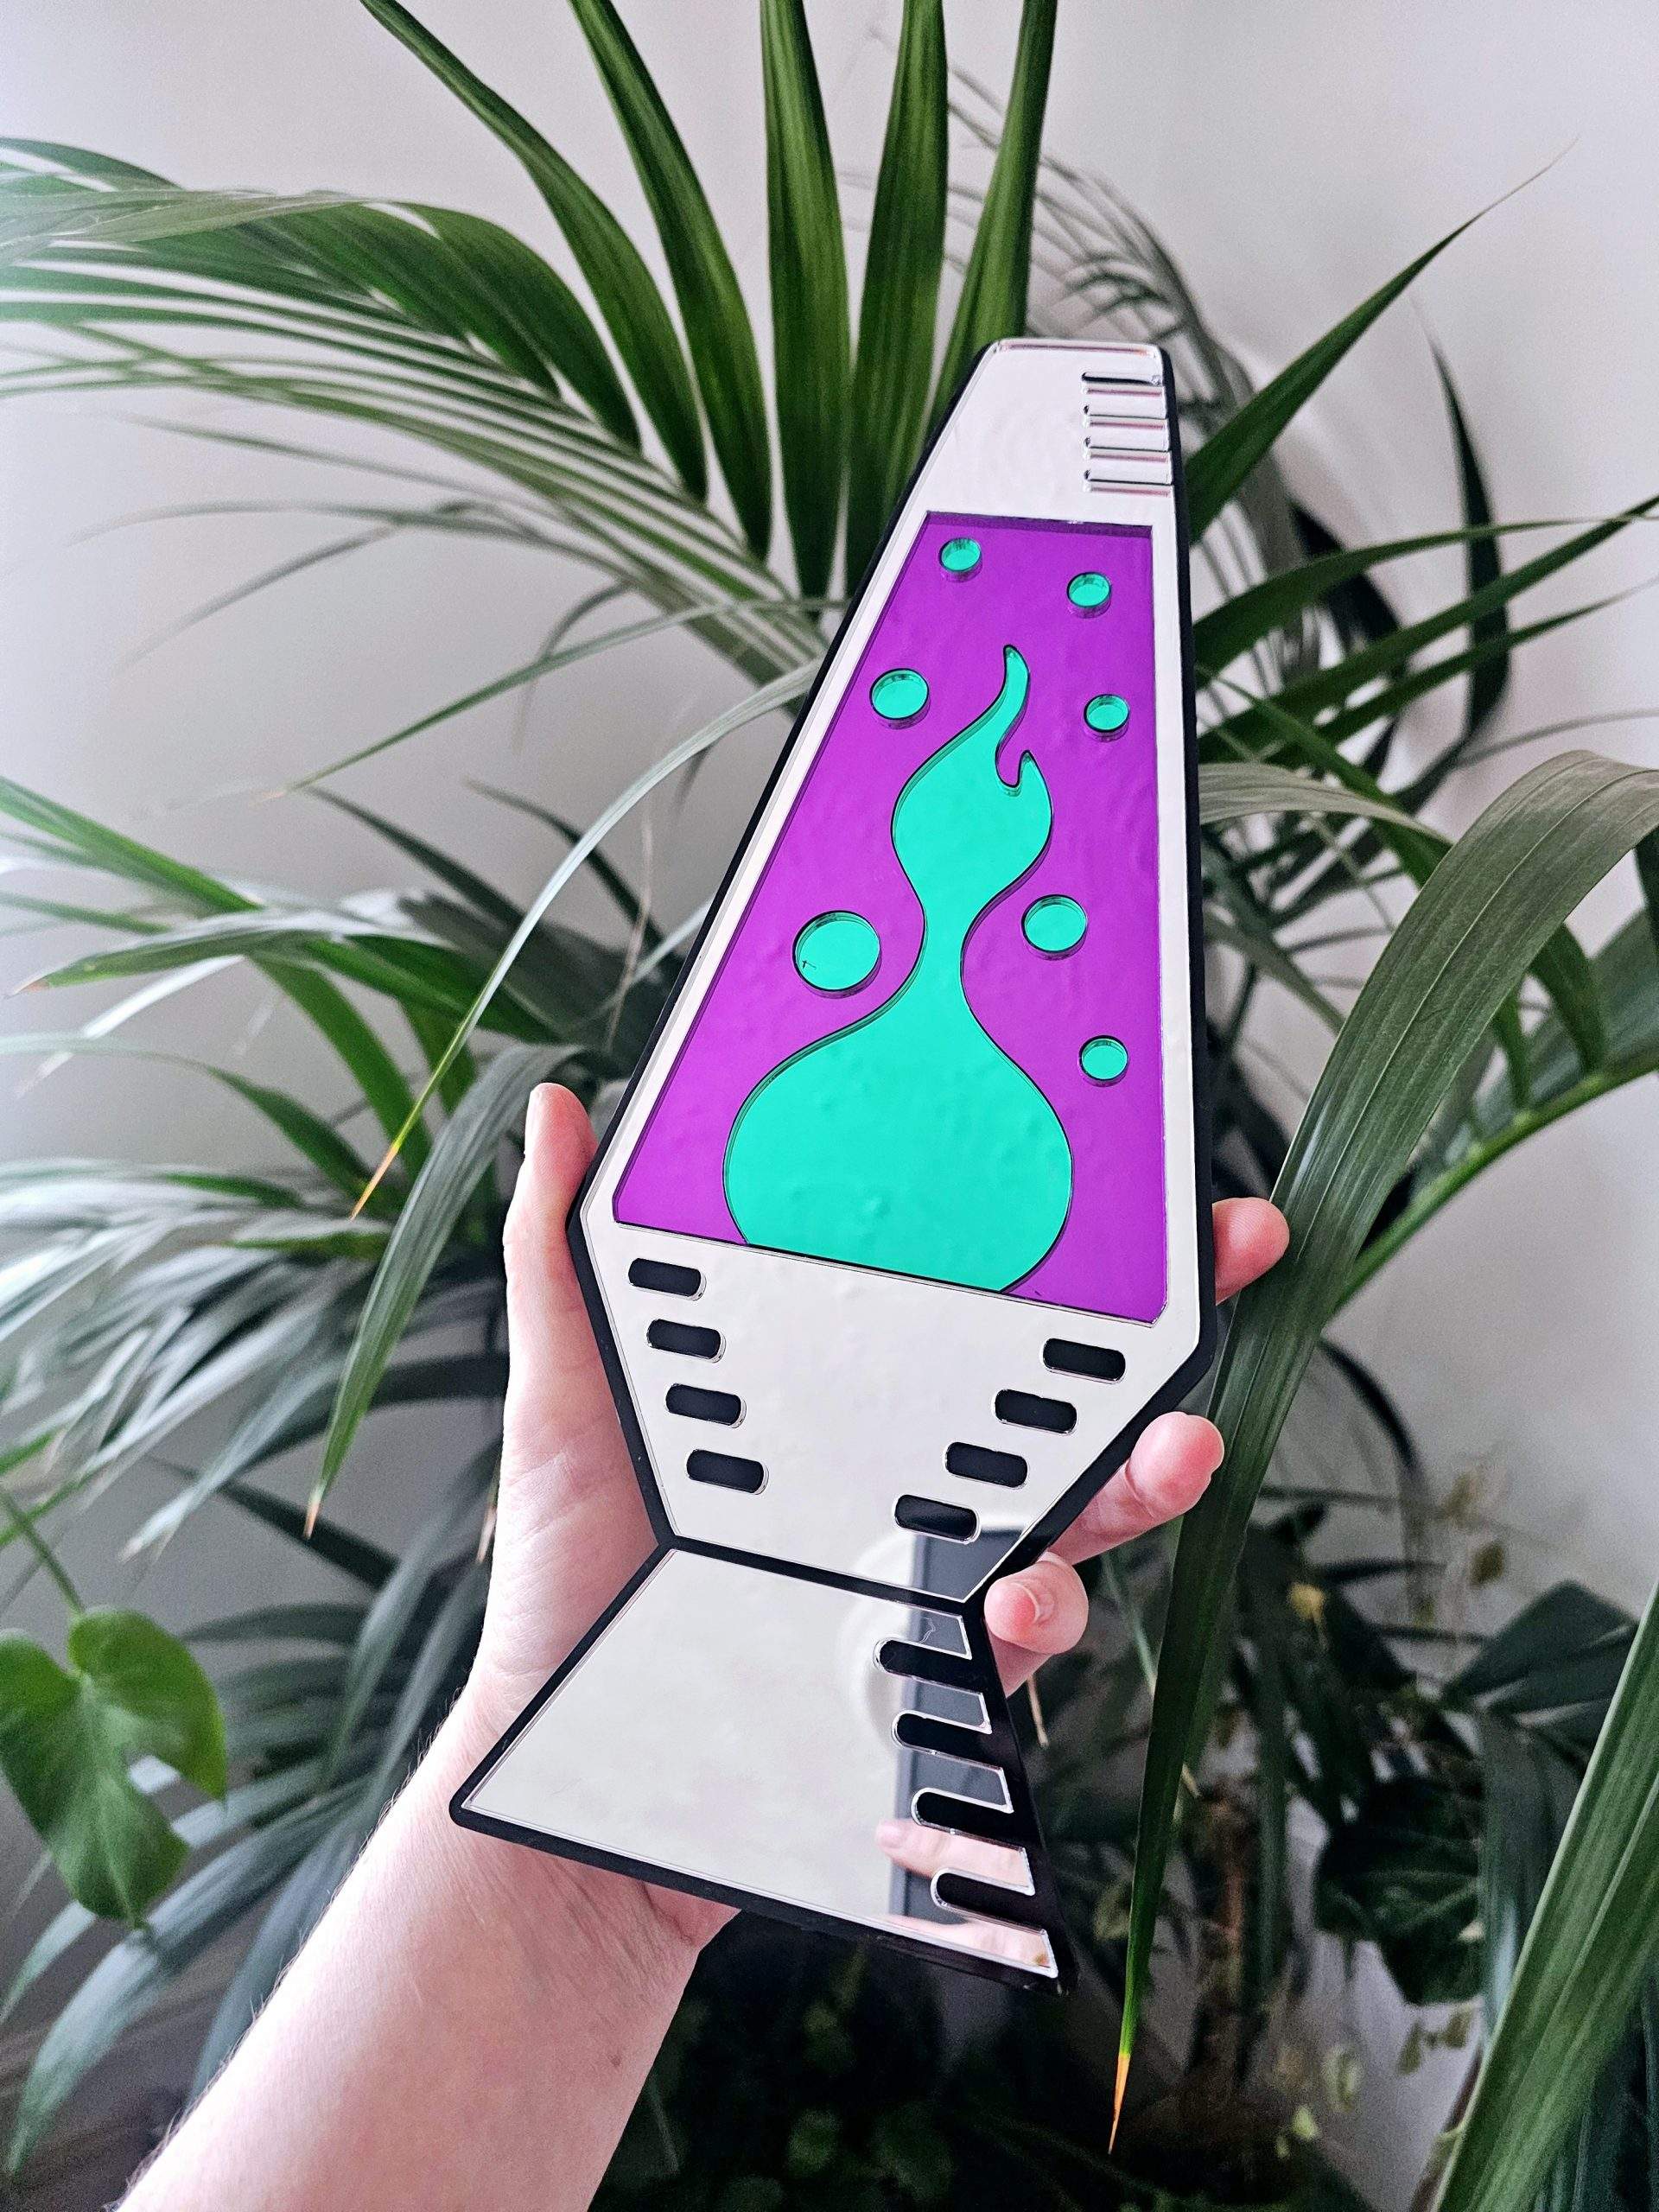 A mirror in the shape of a lava lamp. The lamp is silver, with purple and green 'liquid' pieces.